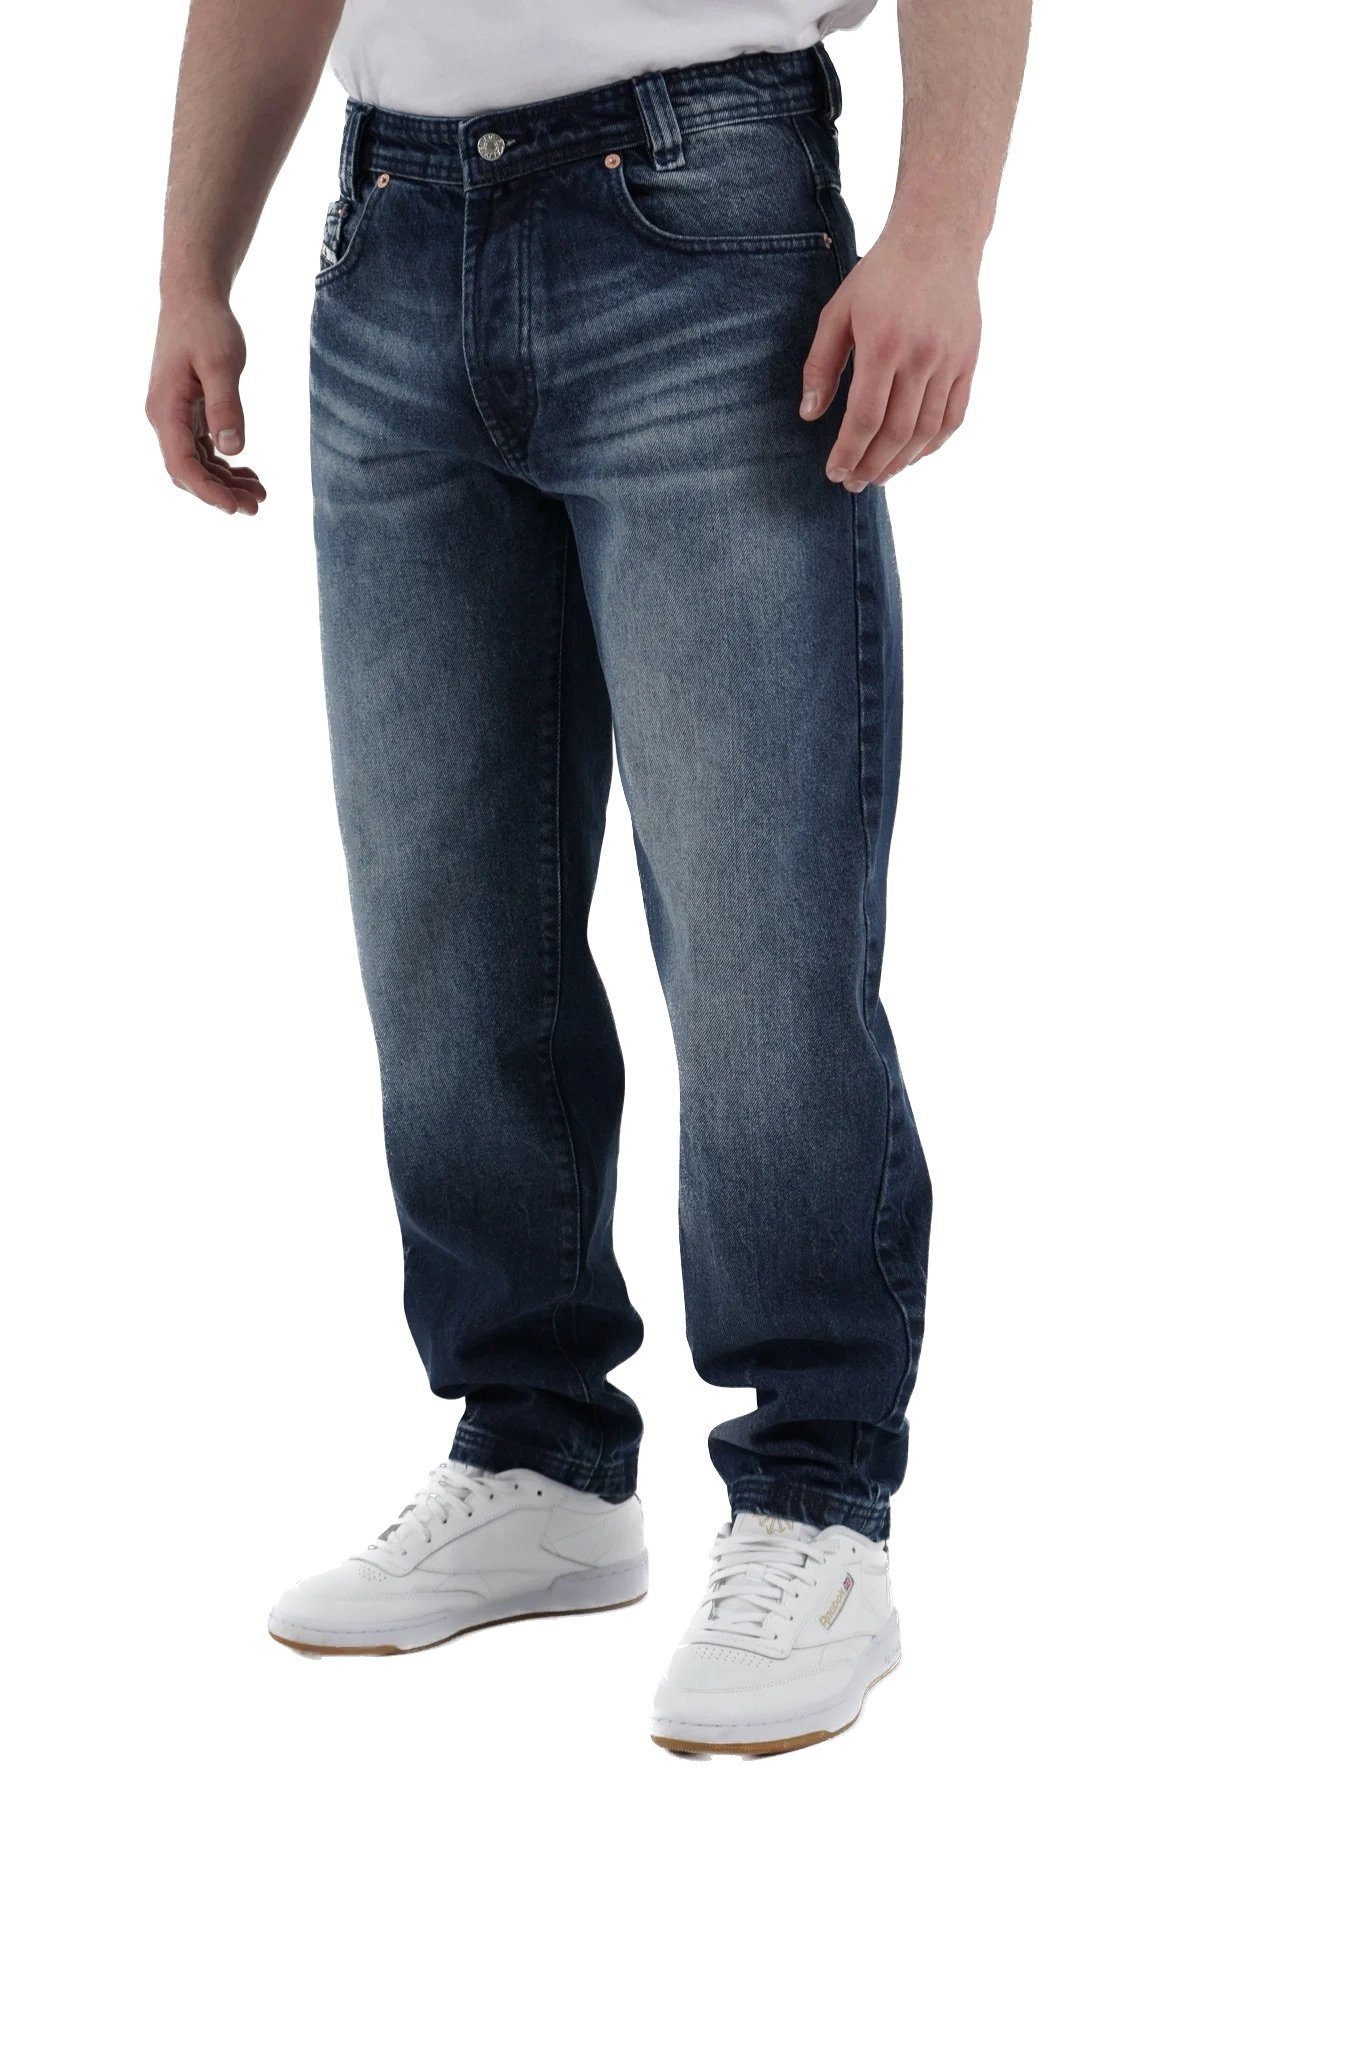 PICALDI Jeans Weite Jeans Zicco 472 Loose Fit, Relaxed Fit Alvaro